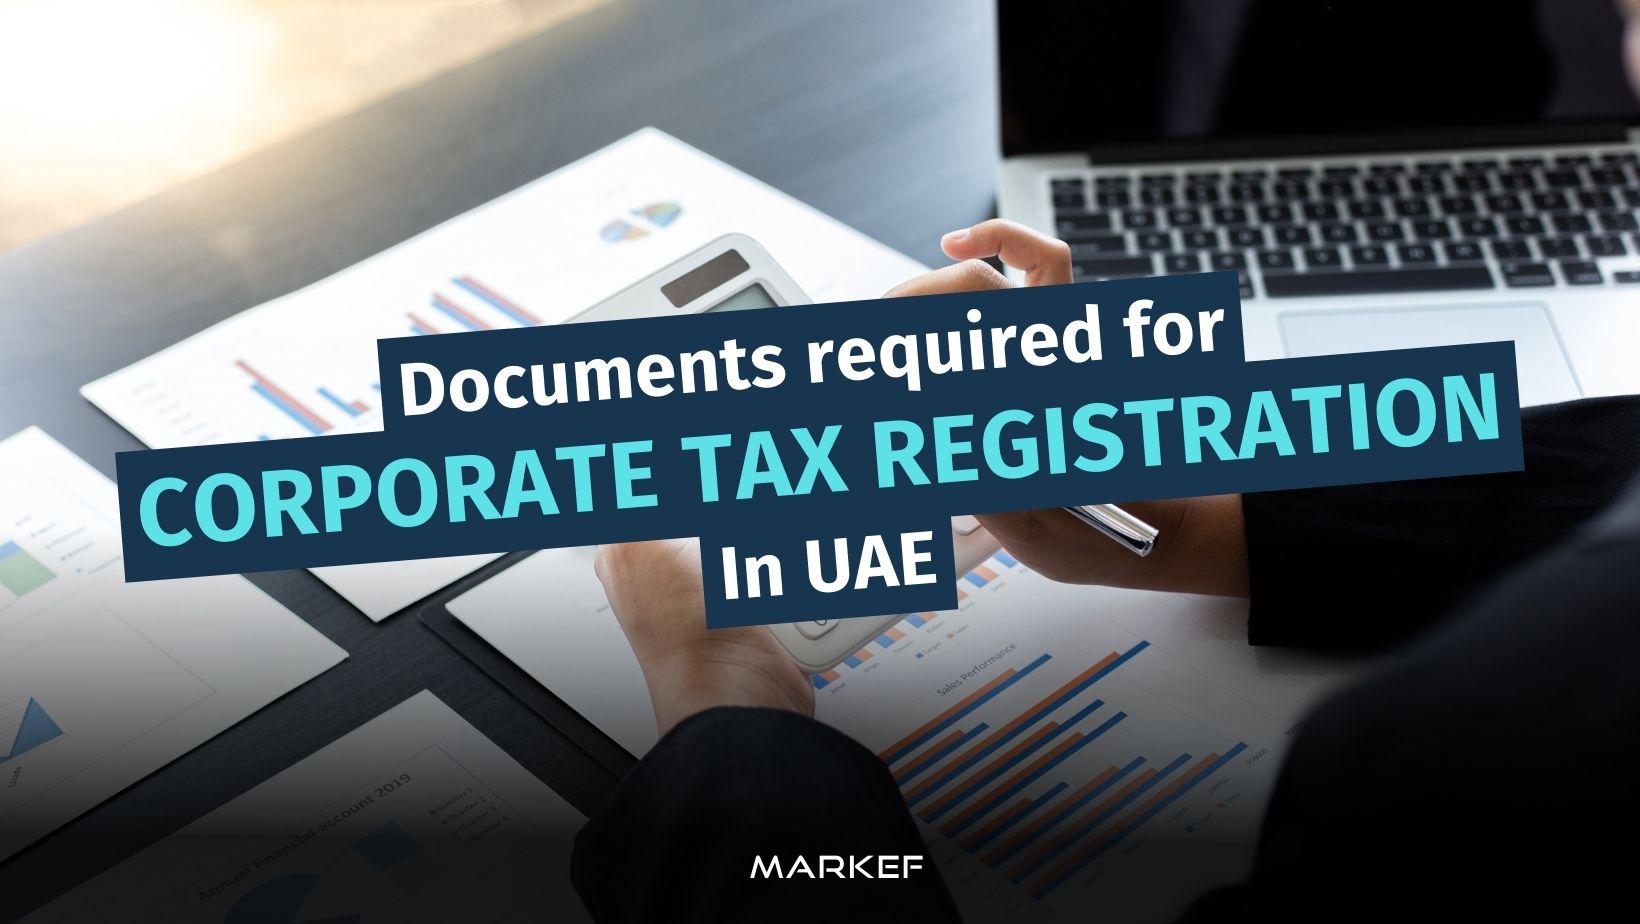 Documents required for Corporate Tax Registration